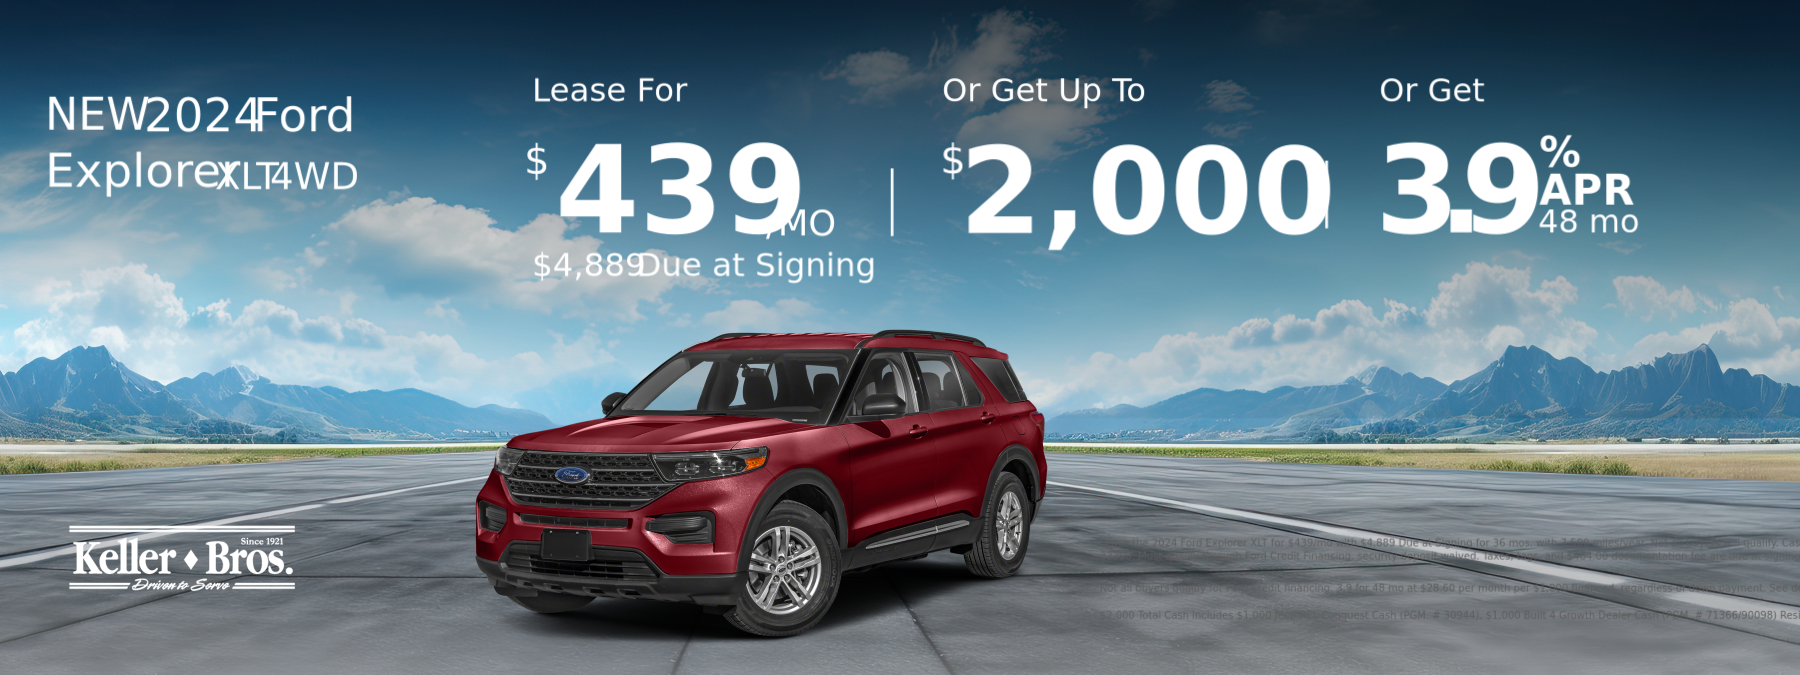 Check out these new offers of the Ford Explorer!